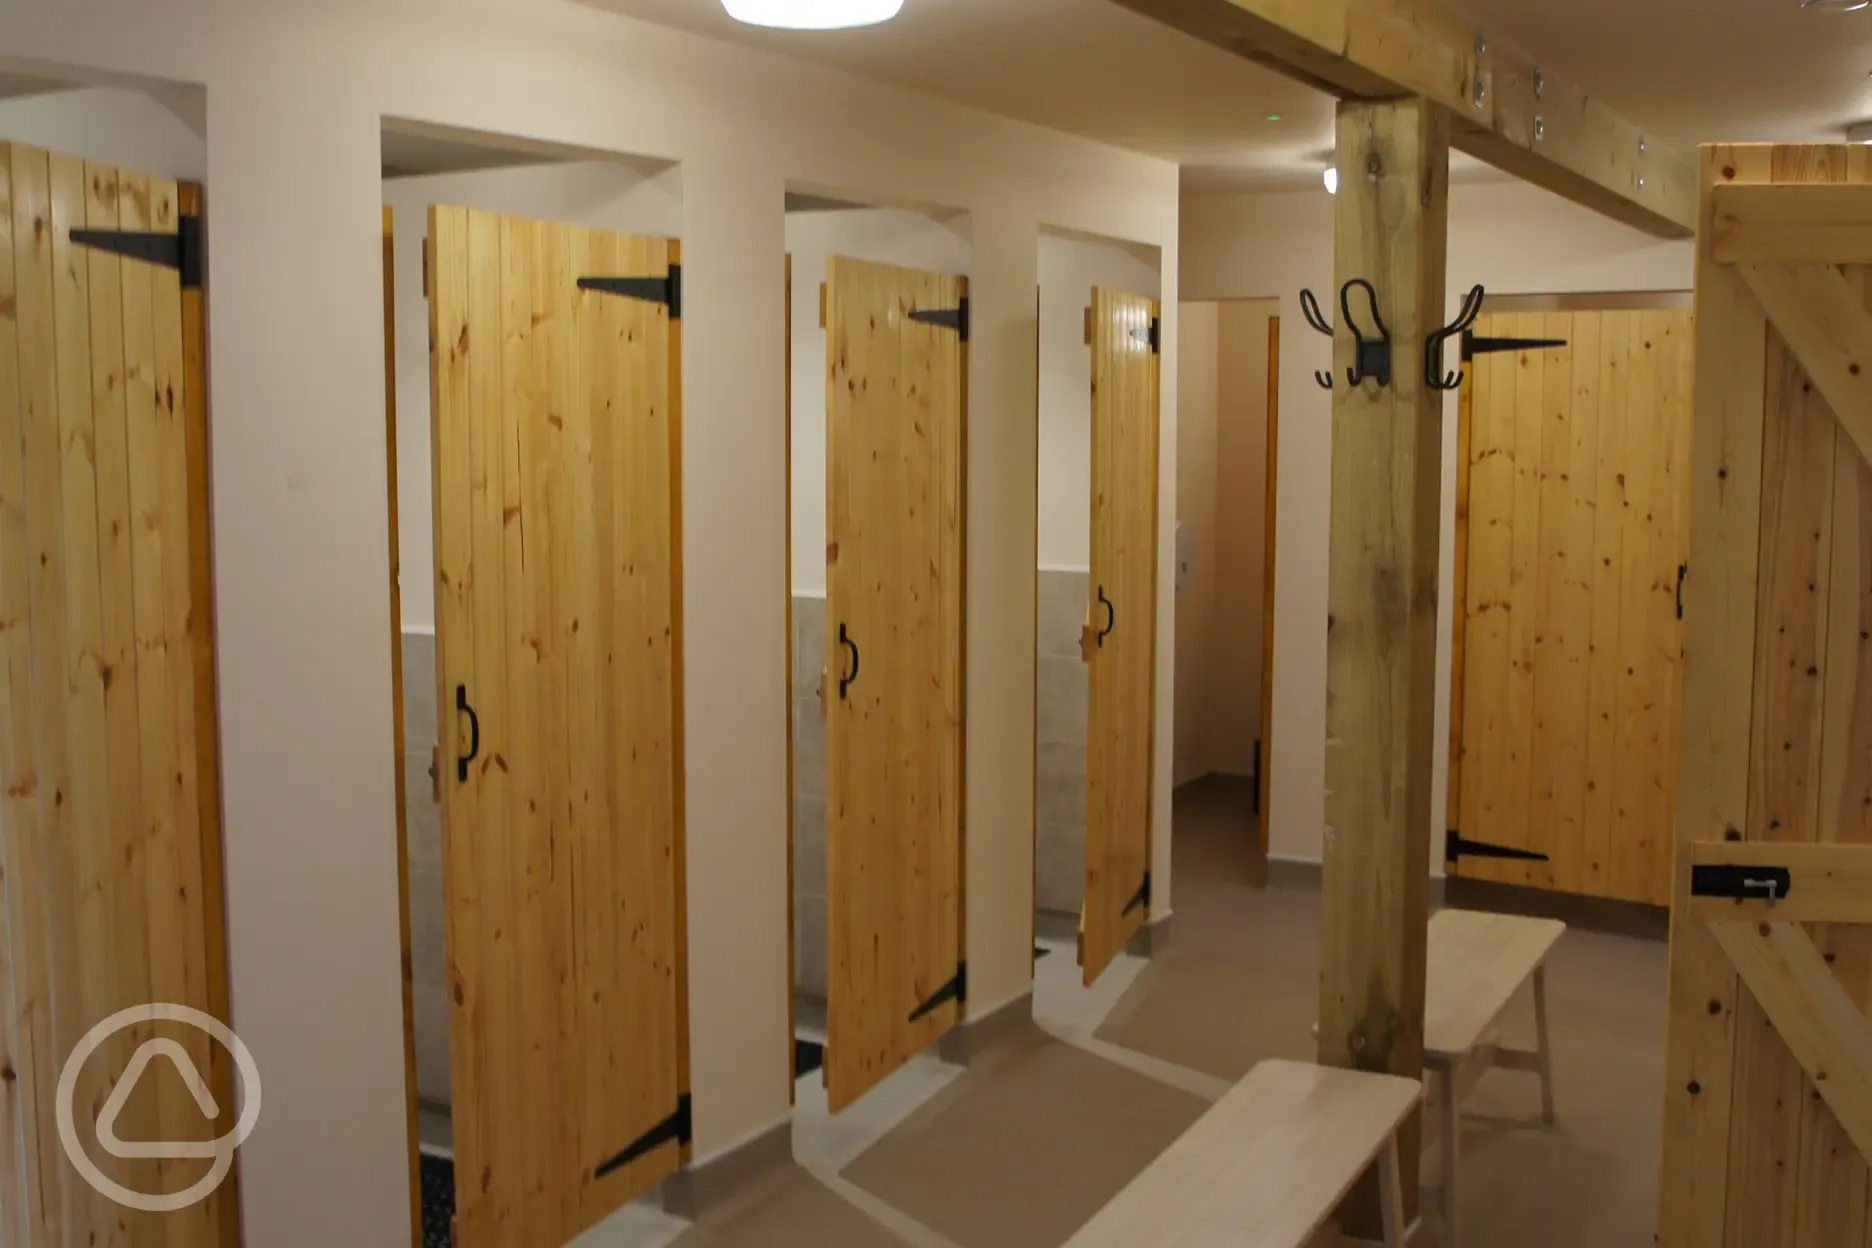 Toilet and Shower Block